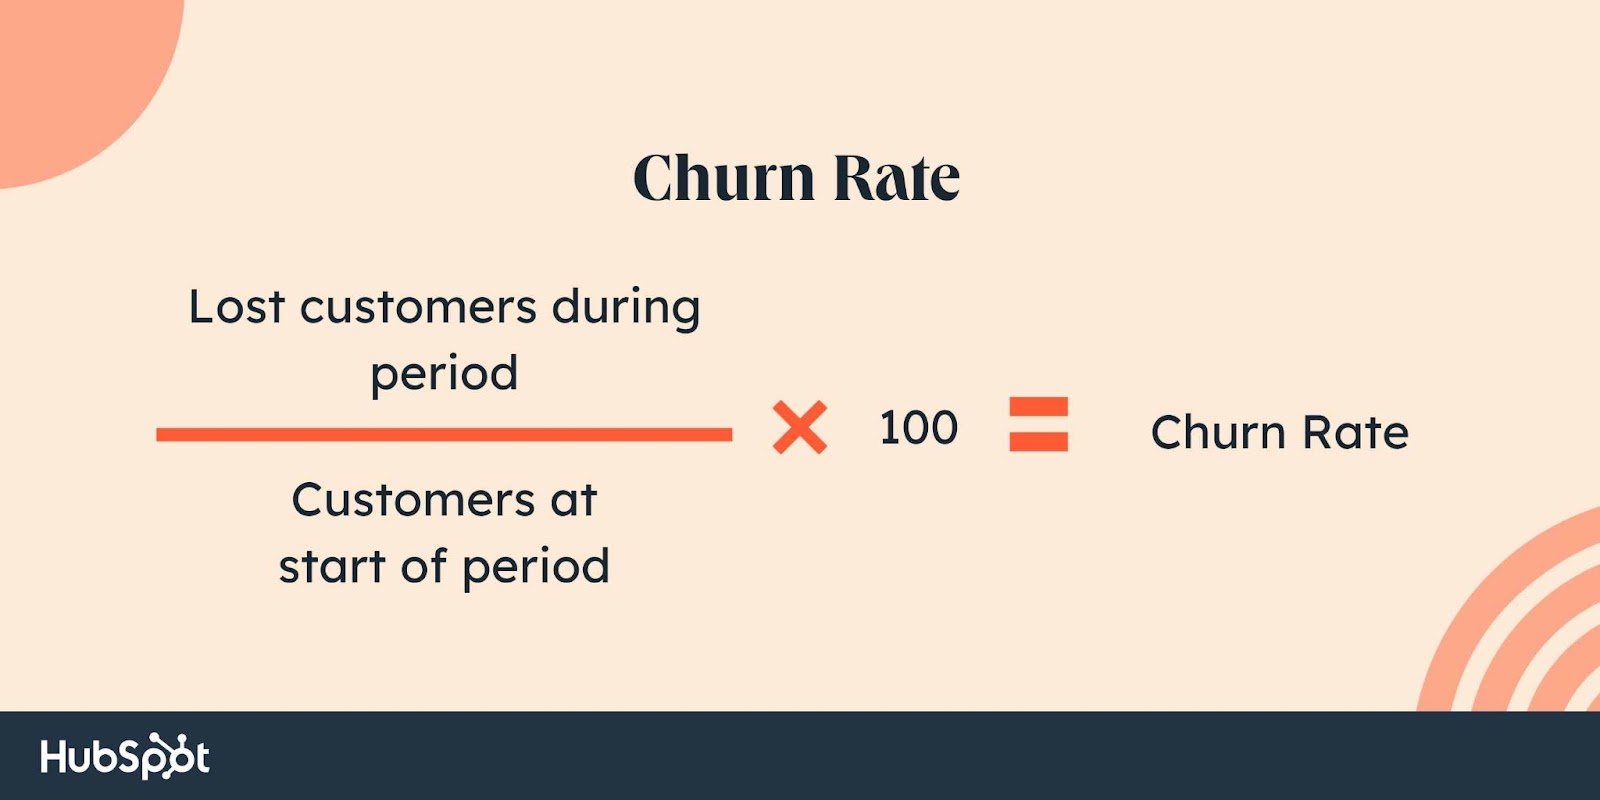 customer success in saas, customer churn. (# Lost Customers During Period / # Customers at Start of Period) x 100.